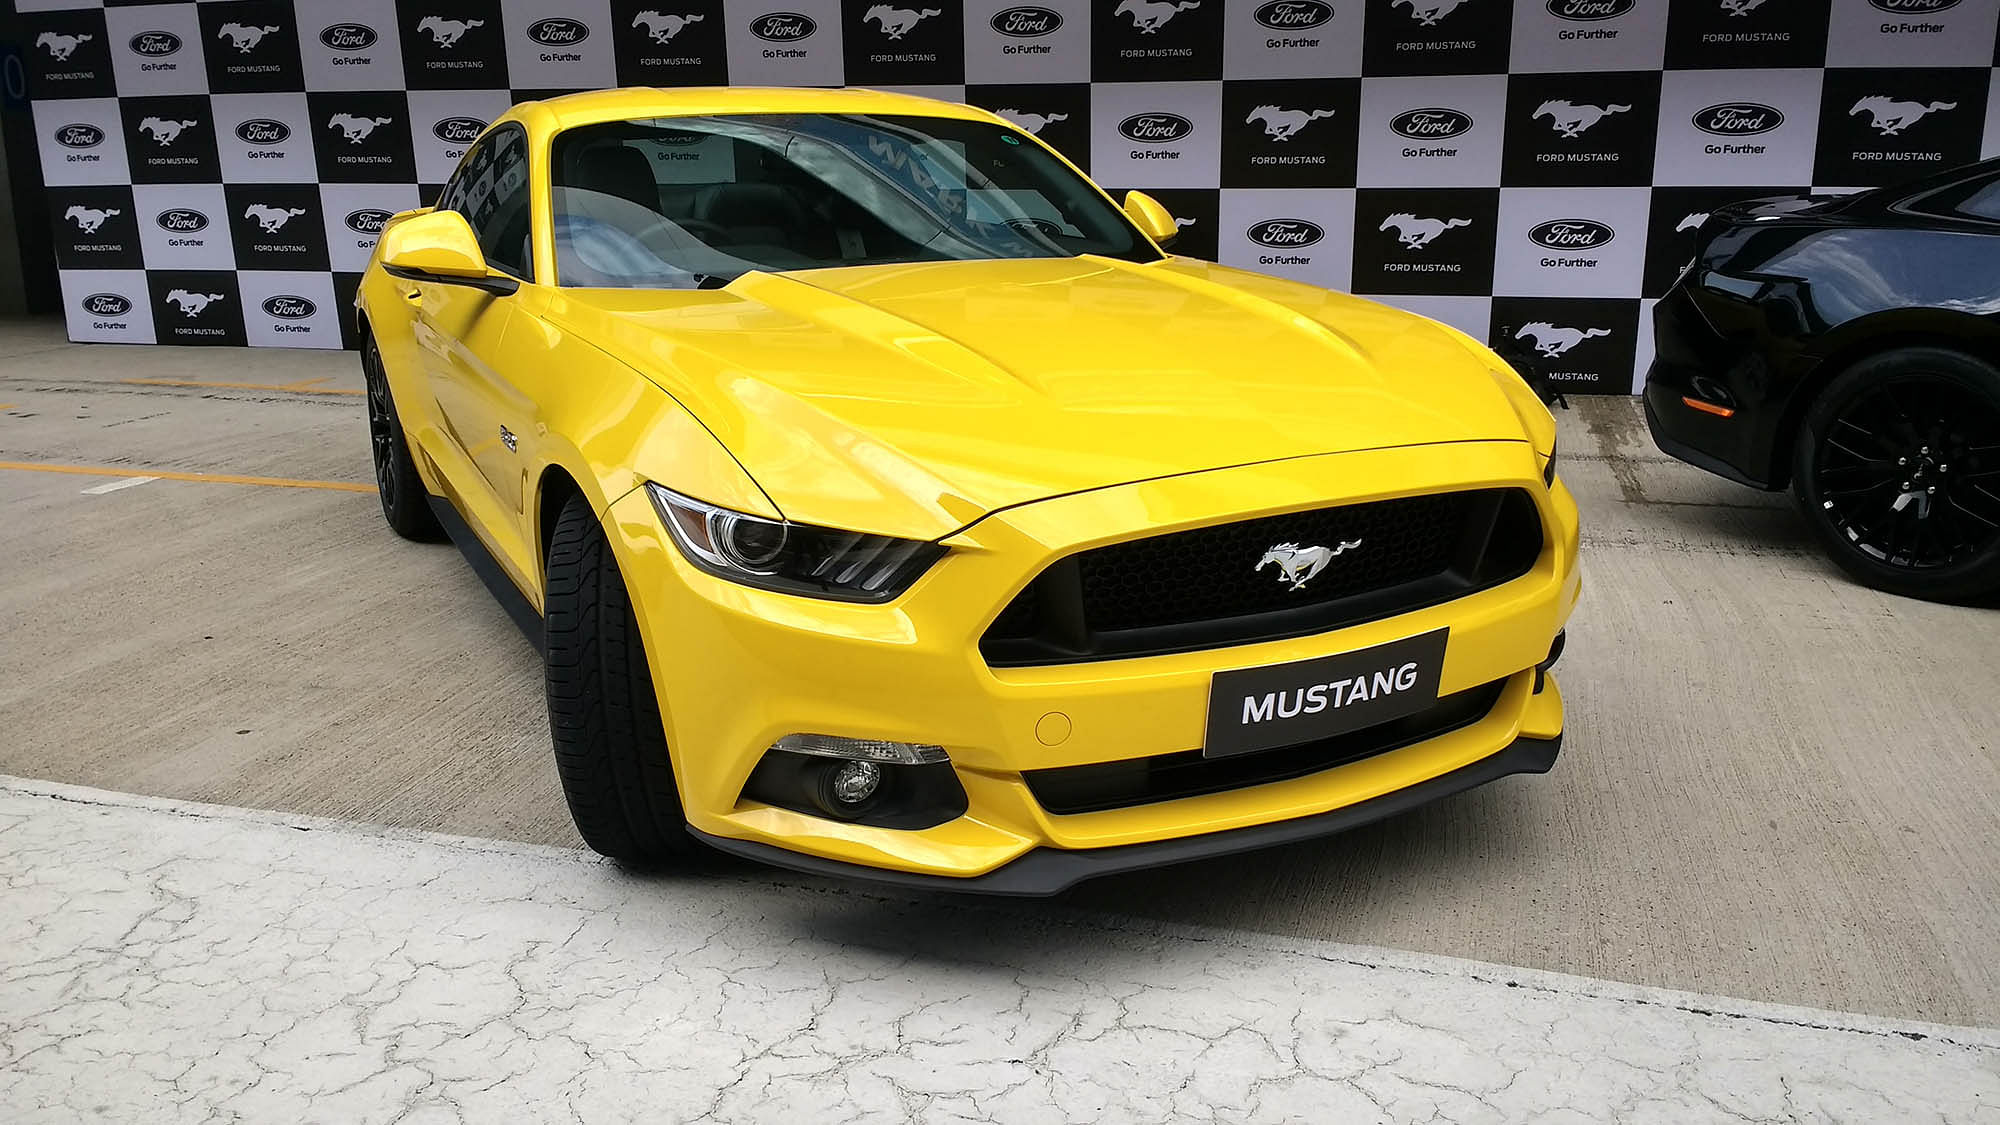 Ford Mustang in the flesh. (Photo: <b>The Quint</b>)